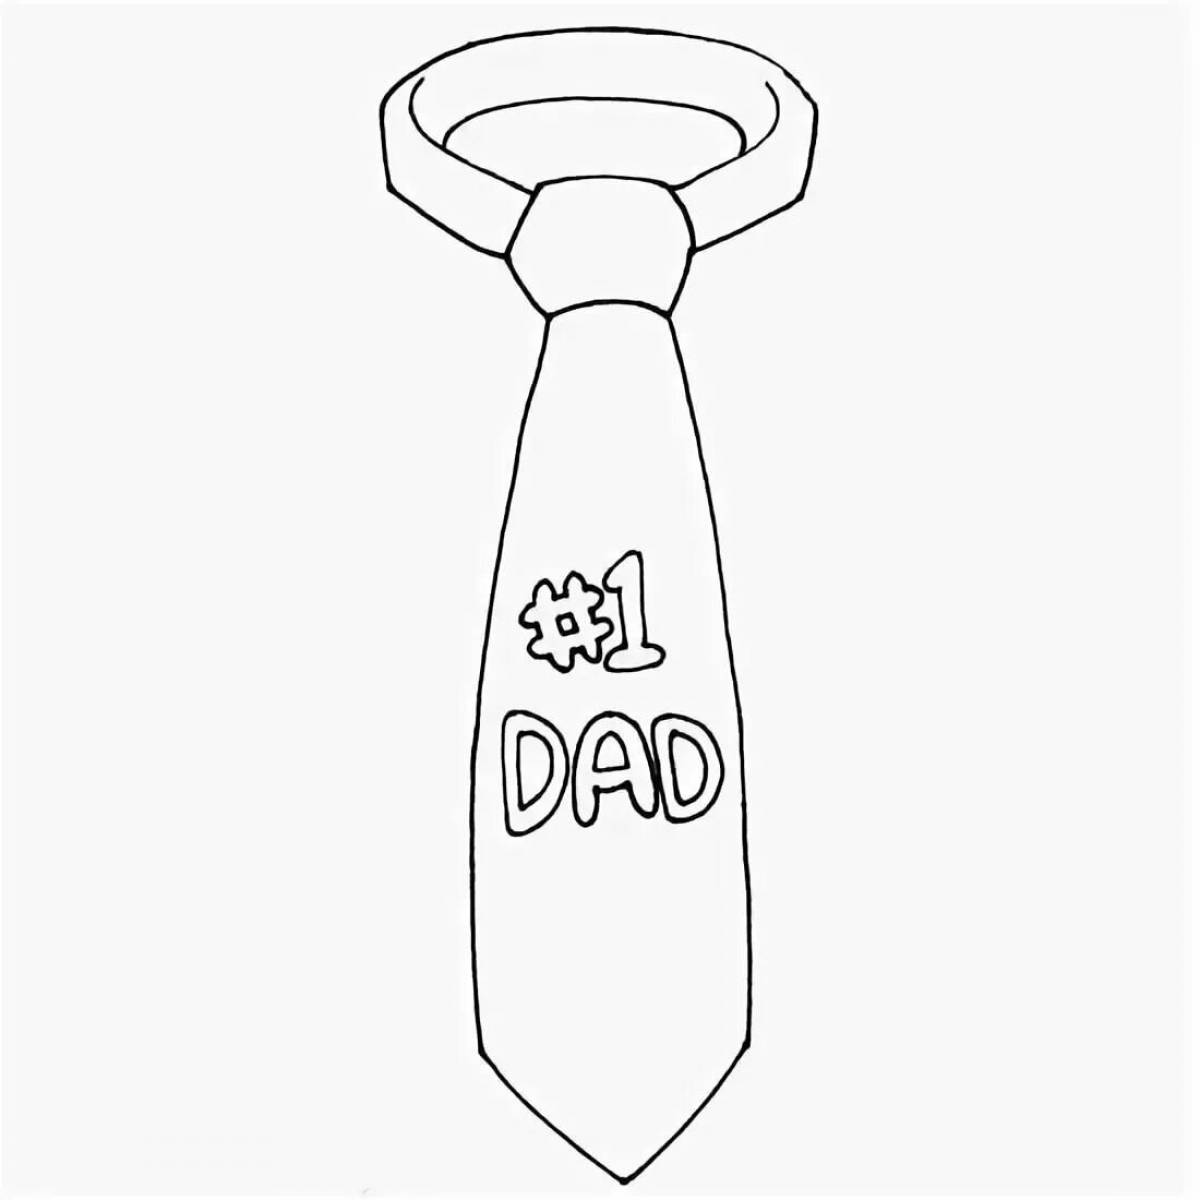 Lovely tie coloring for dad